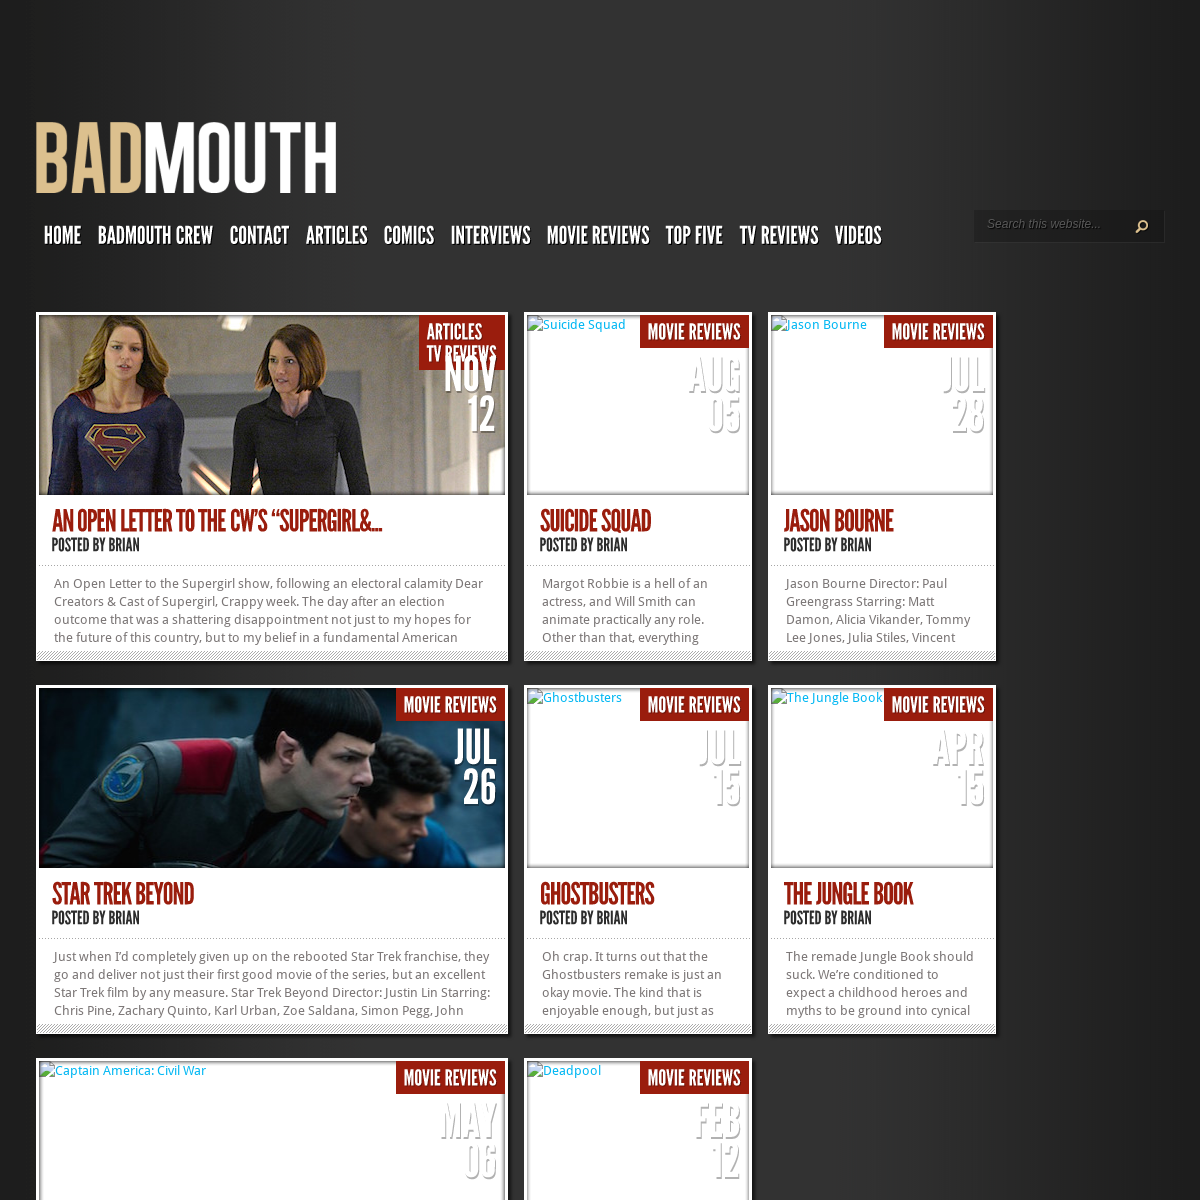 A complete backup of badmouth.net